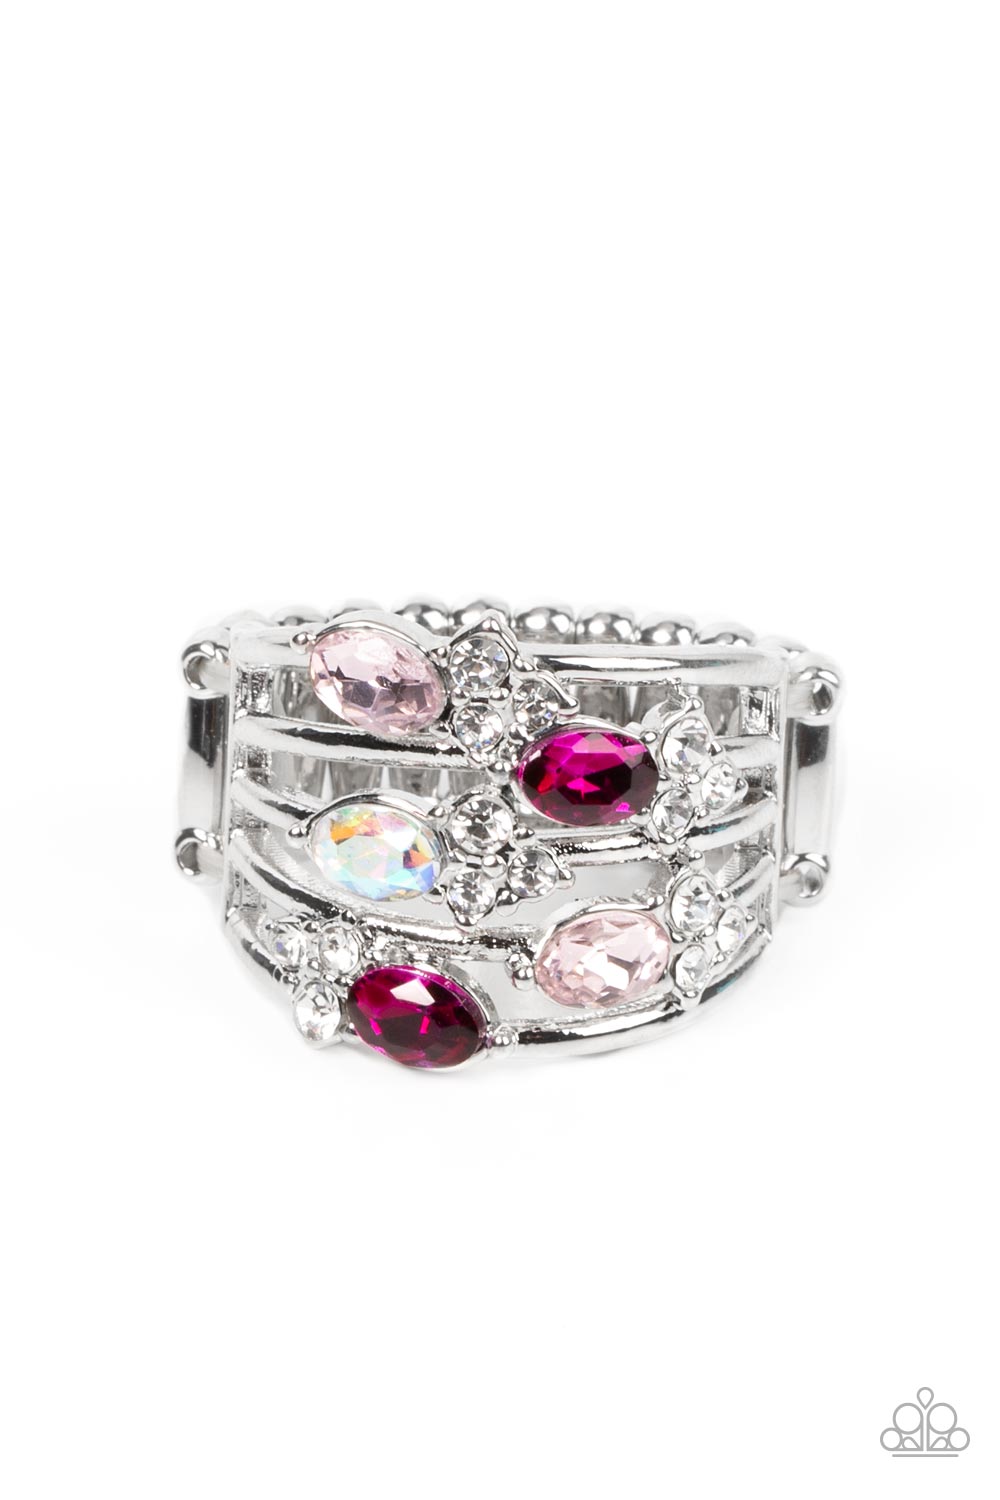 Paparazzi Rings - Ethereal Escapade - Pink